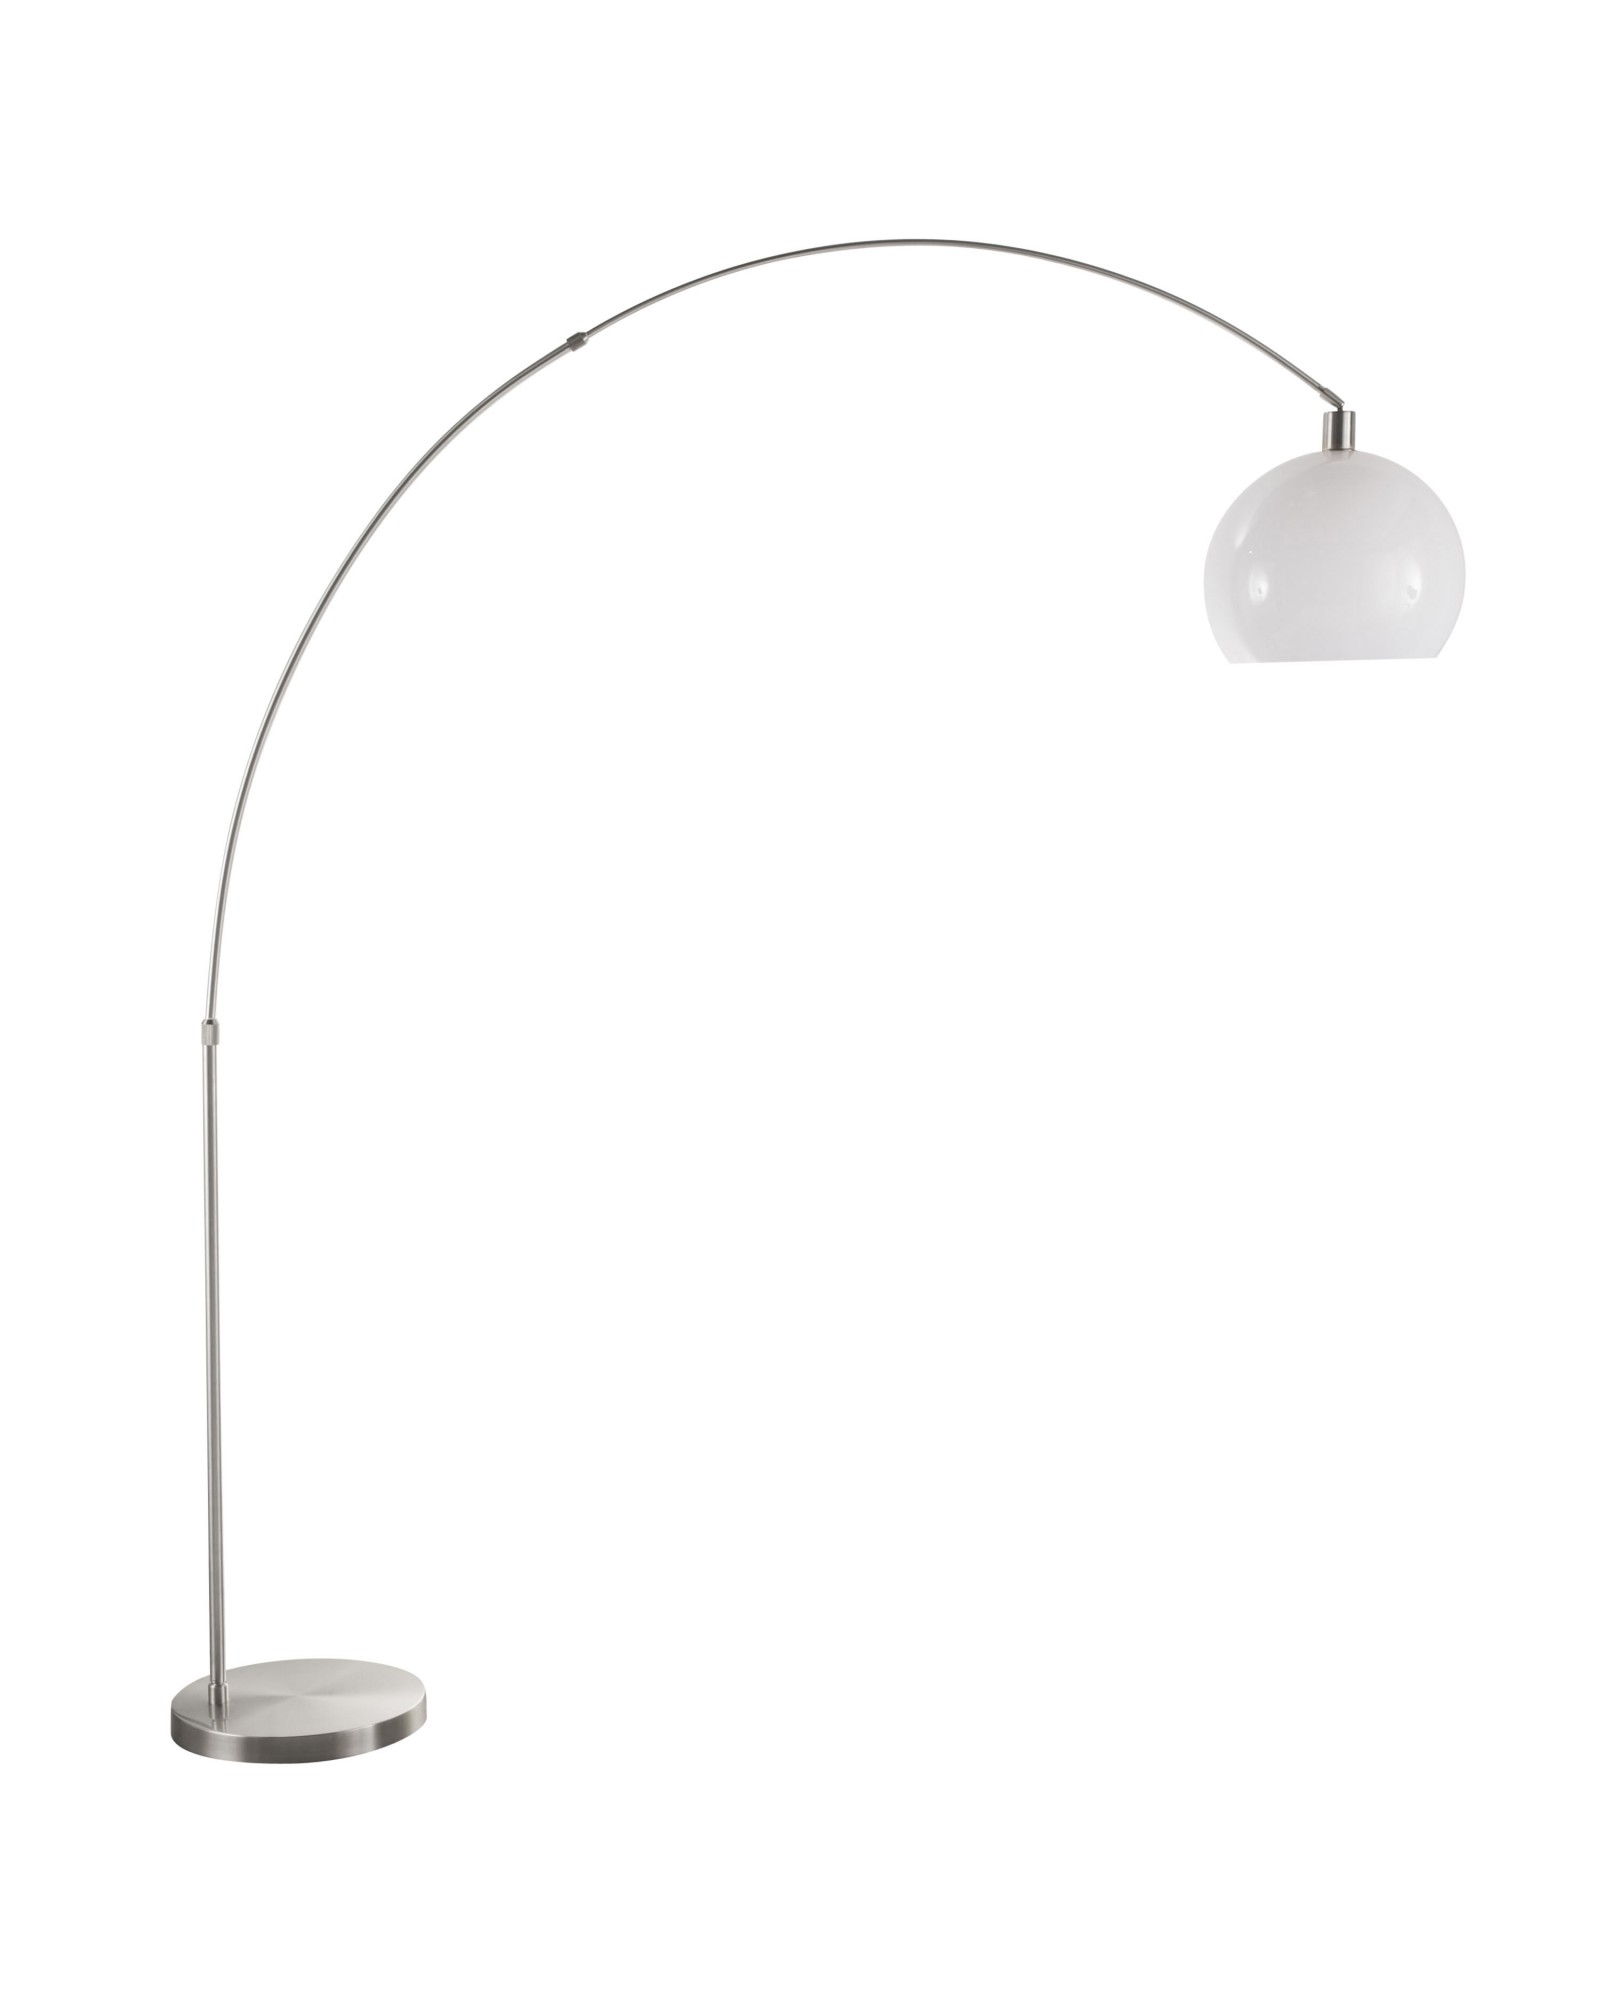 Decco Modern Arched Floor Lamp in Satin Nickel with White Shade